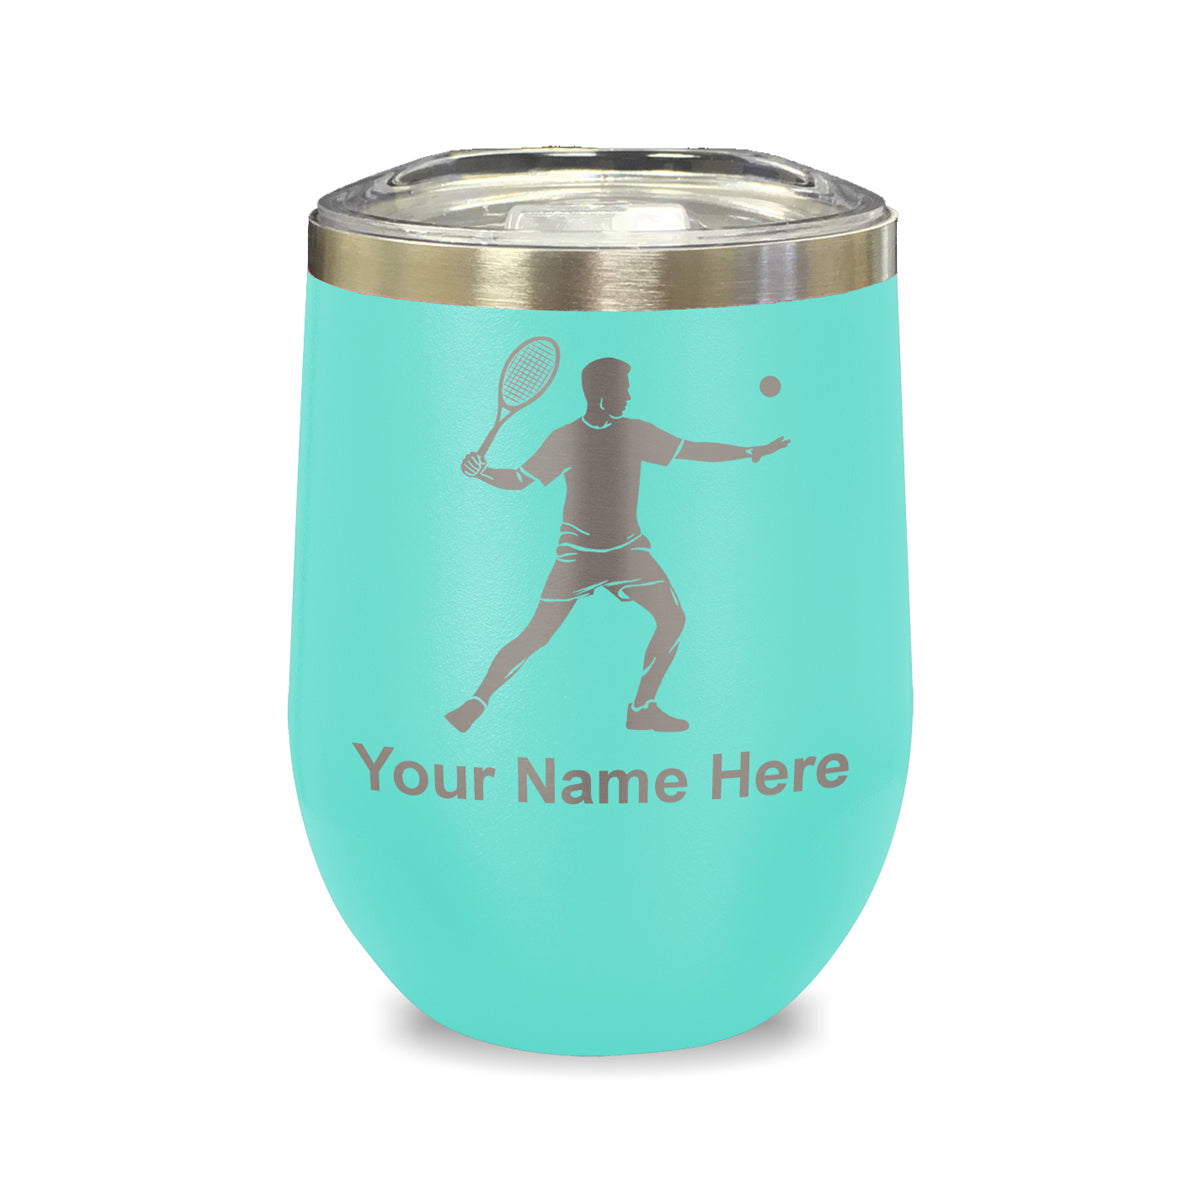 LaserGram Double Wall Stainless Steel Wine Glass, Tennis Player Man, Personalized Engraving Included